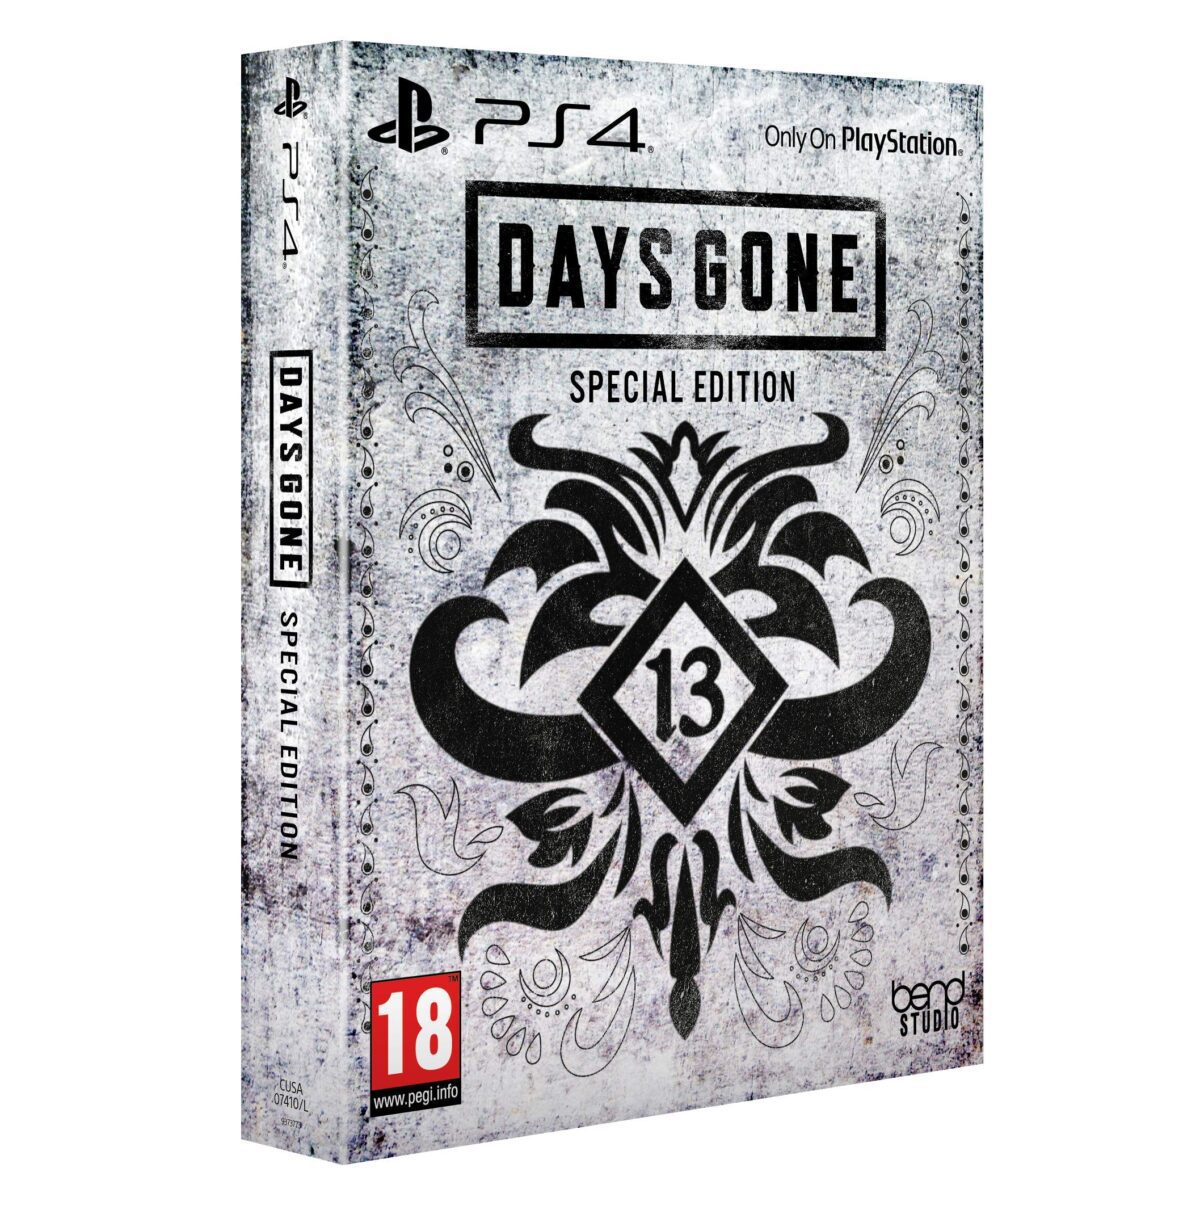 Days Gone: Special Edition Steelbook PS4